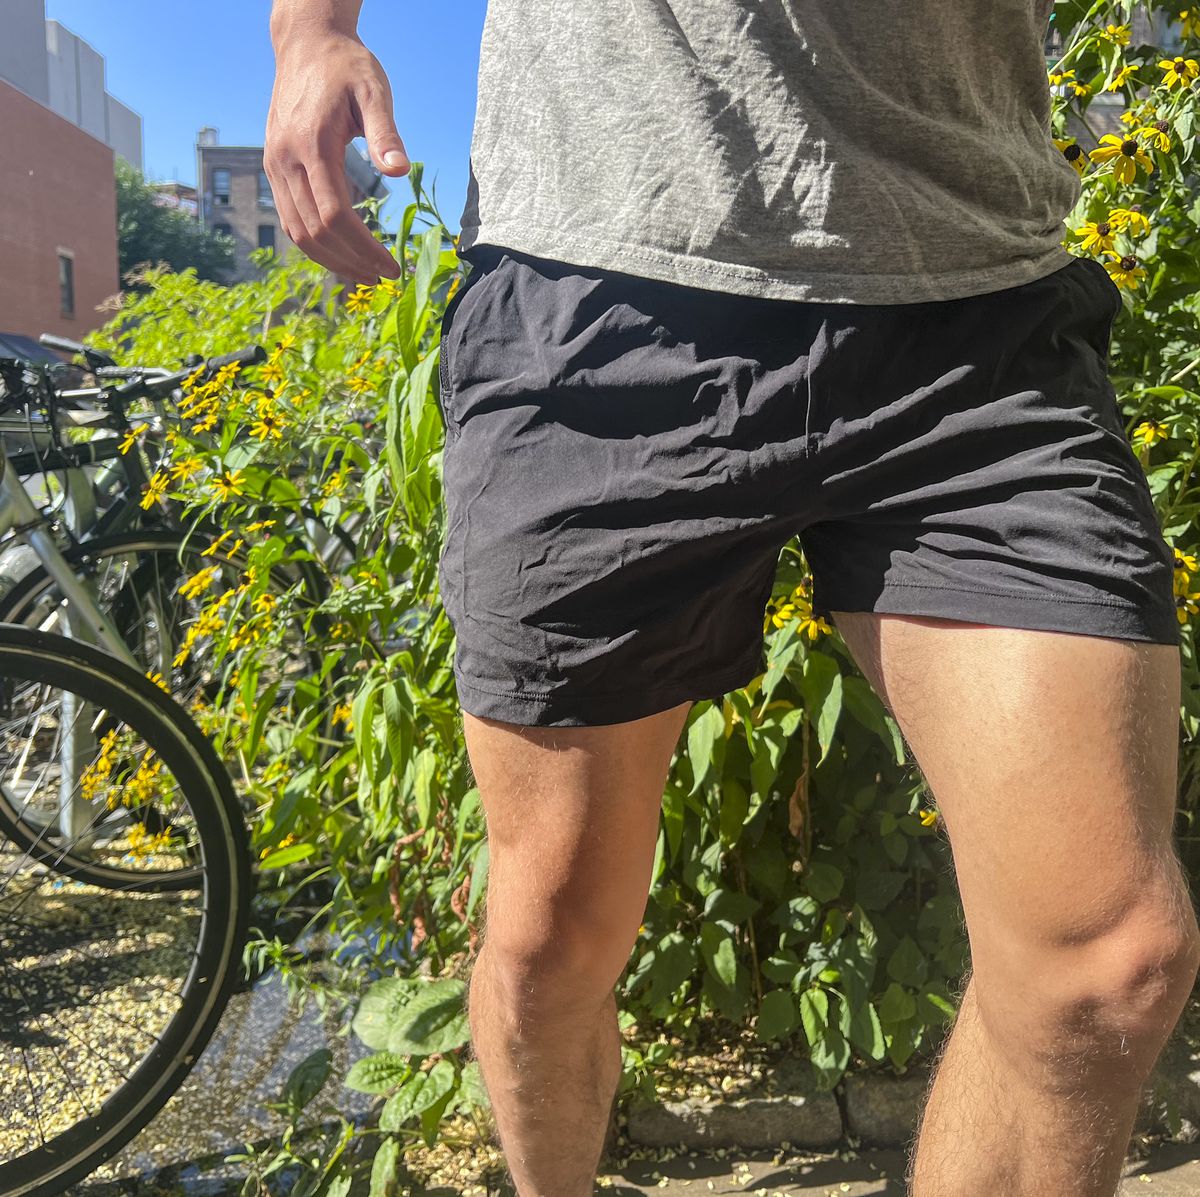 black lulu lemon shorts  Lulu lemon shorts, Lulu shorts, Black shorts  outfit